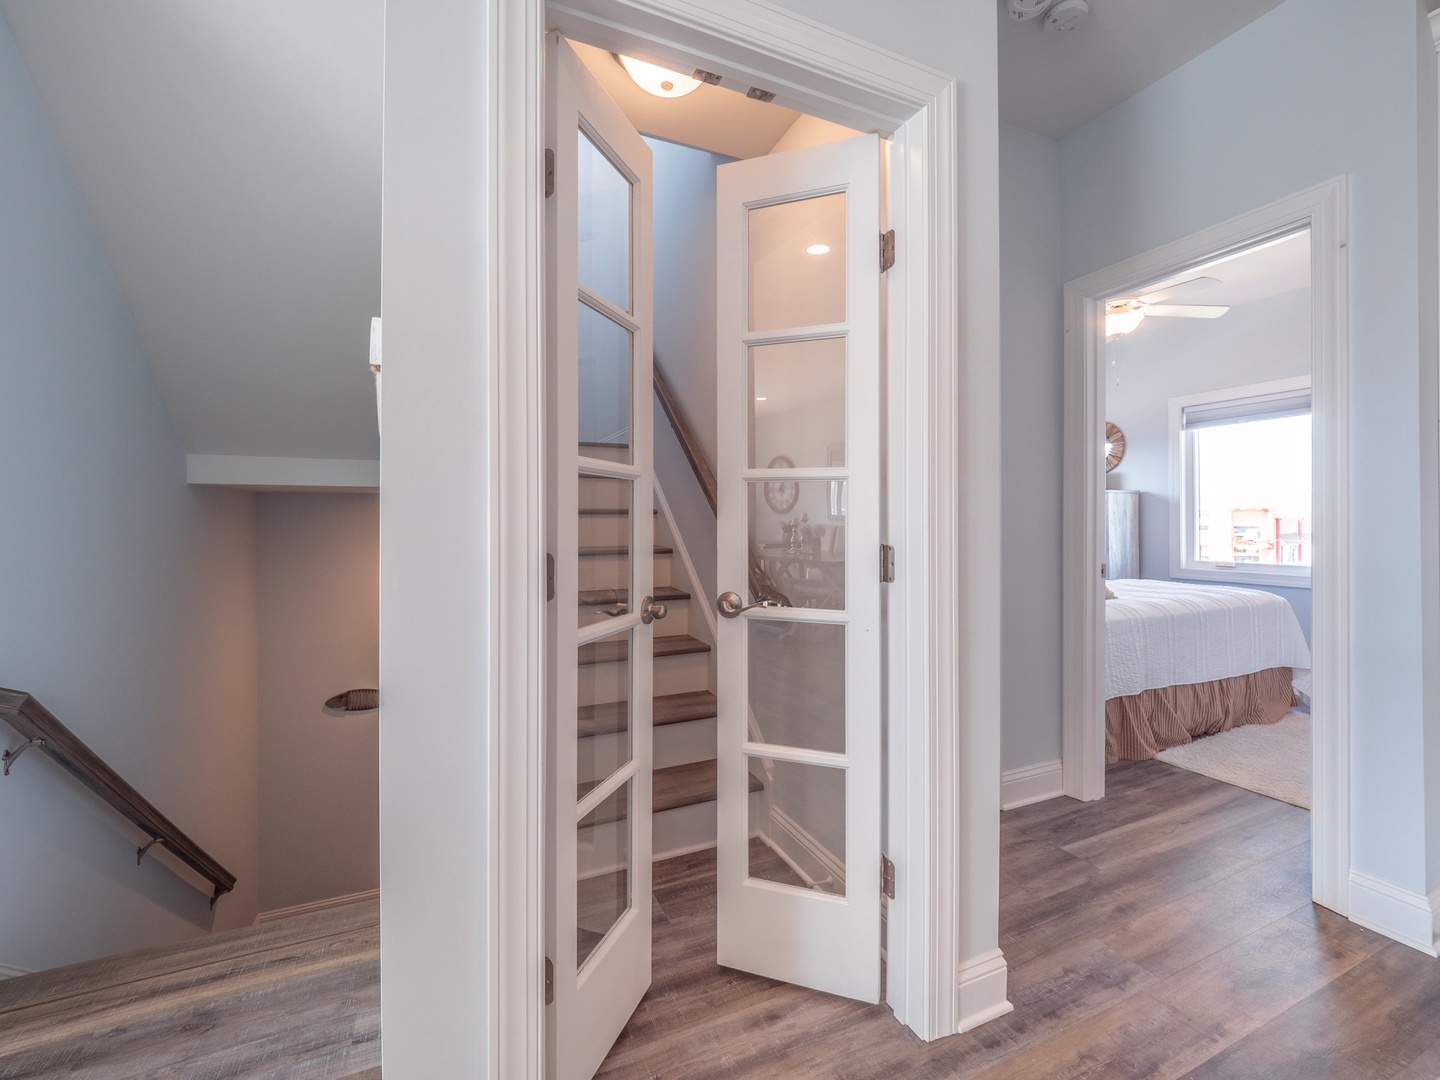 12 Q12-large-2000px - steps up to master suite